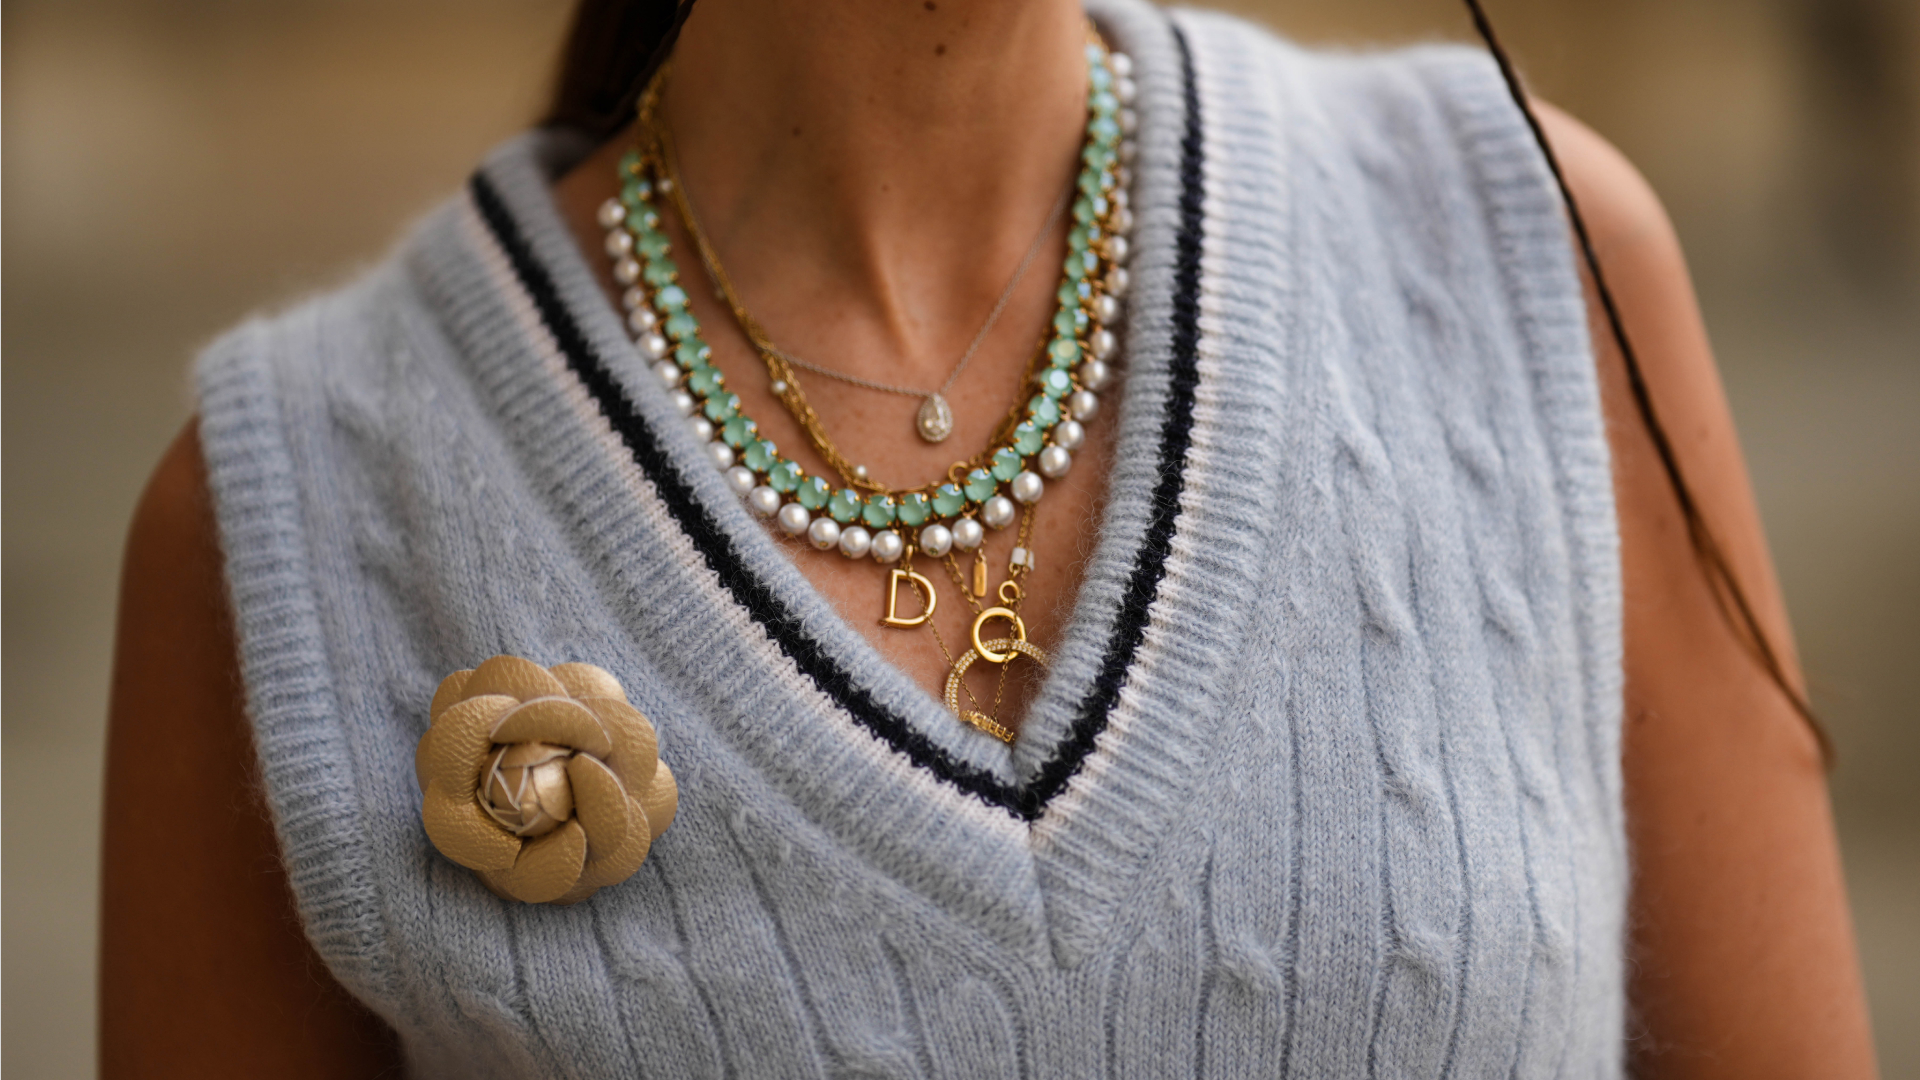 How to Layer Necklaces - Tips for Wearing More Than One Necklace At a Time